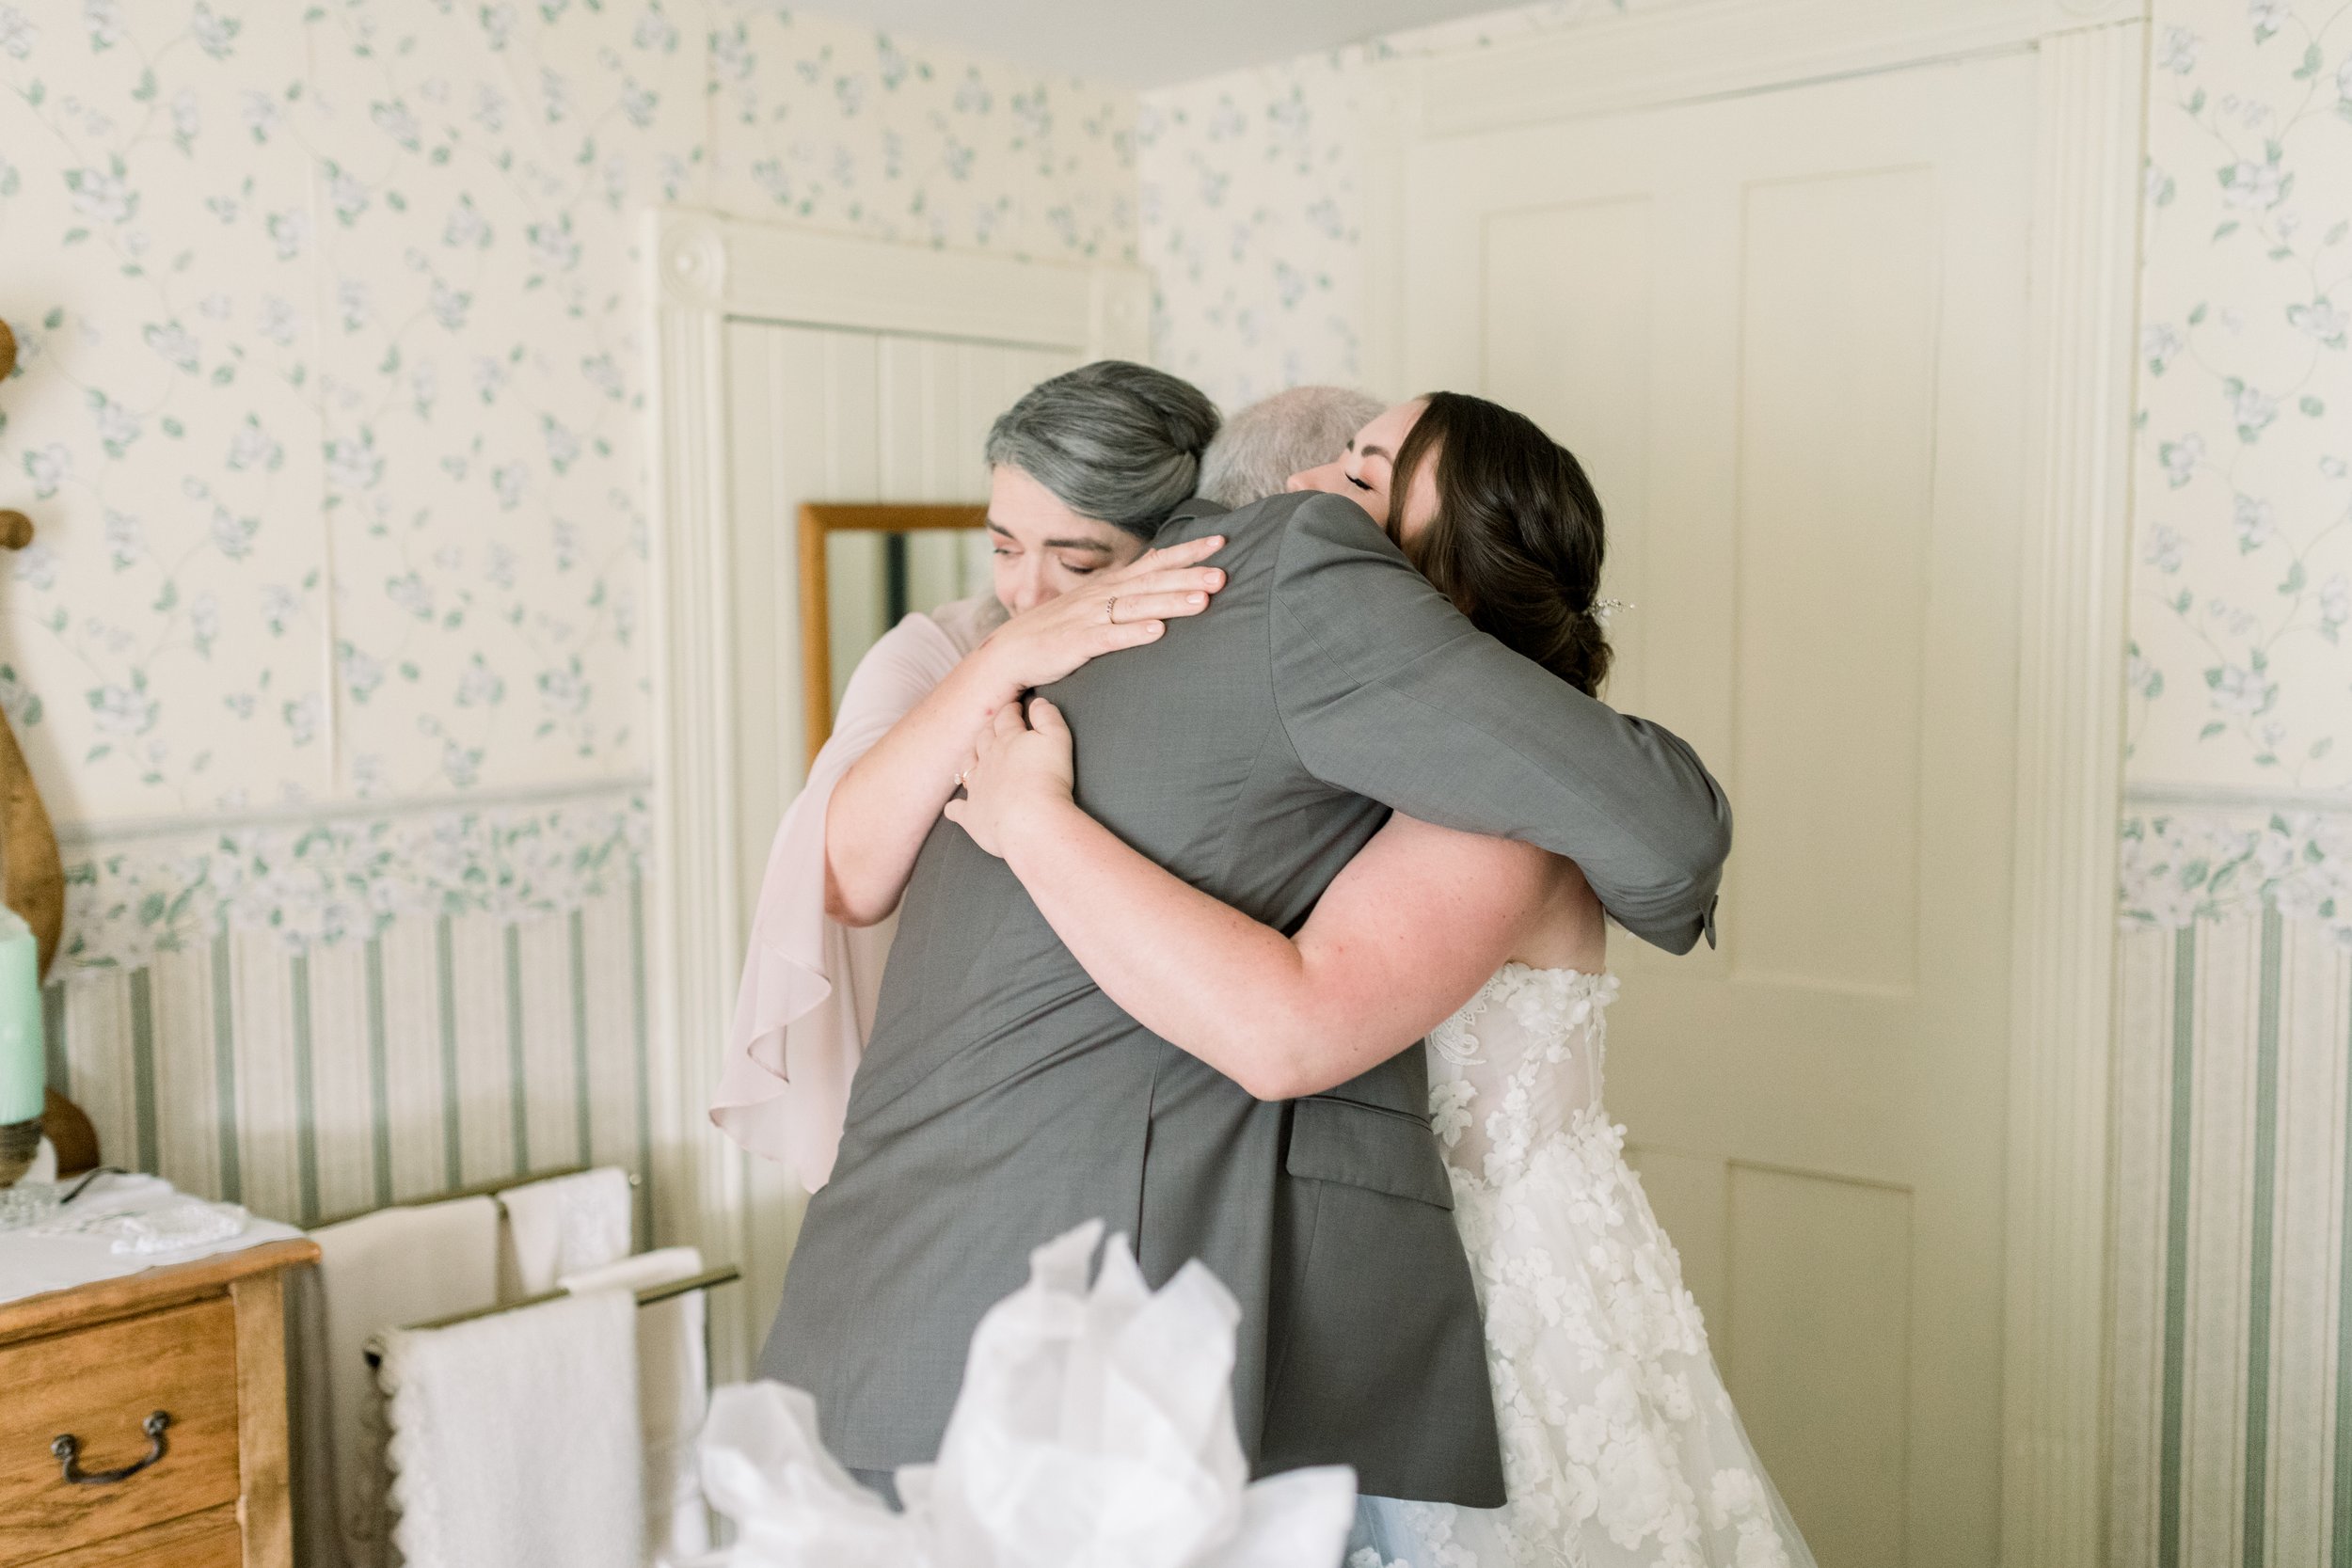  A bride spends a moment hugging her parents before the wedding by Chelsea Mason Photography in Boulter. family hug at wedding wedding moments #chelseamasonphotography #chelseamasonweddings #Ontarioweddings #Boulterweddingphotographer #laceweddinggow